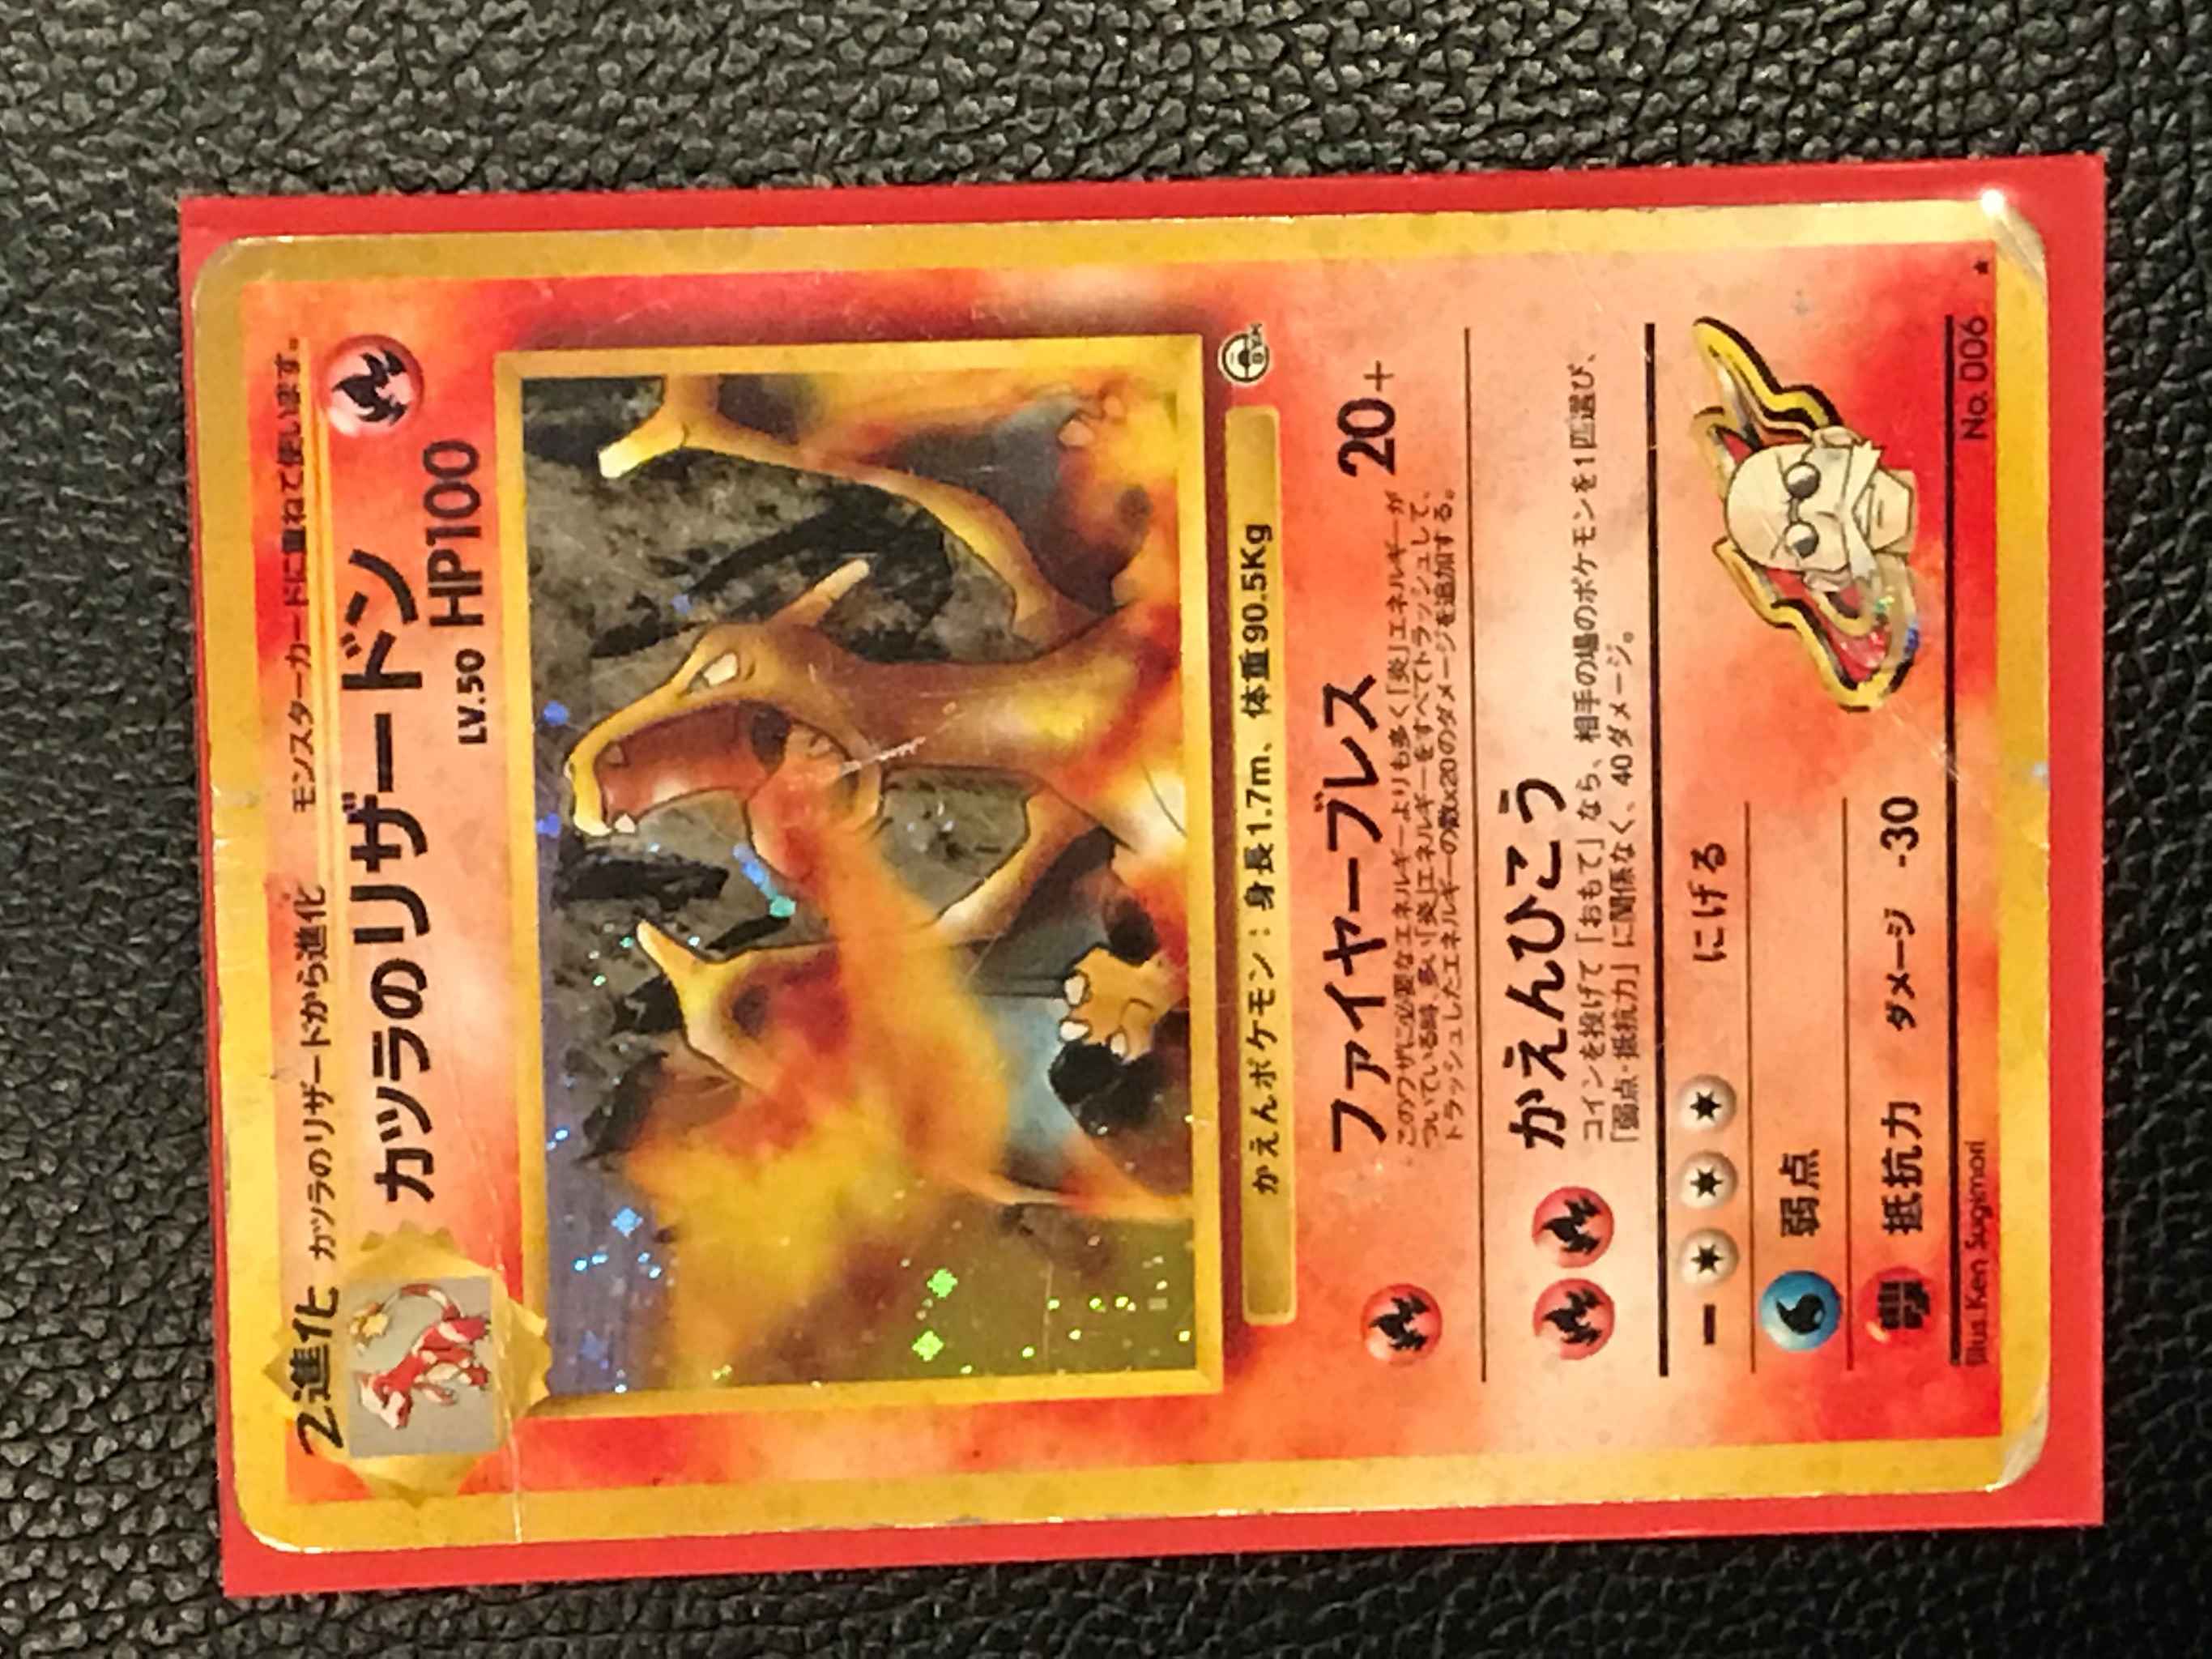 Japanese Blaine S Charizard 2 132 Holo Blaine S Charizard Gym Challenge Pokemon Online Gaming Store For Cards Miniatures Singles Packs Booster Boxes